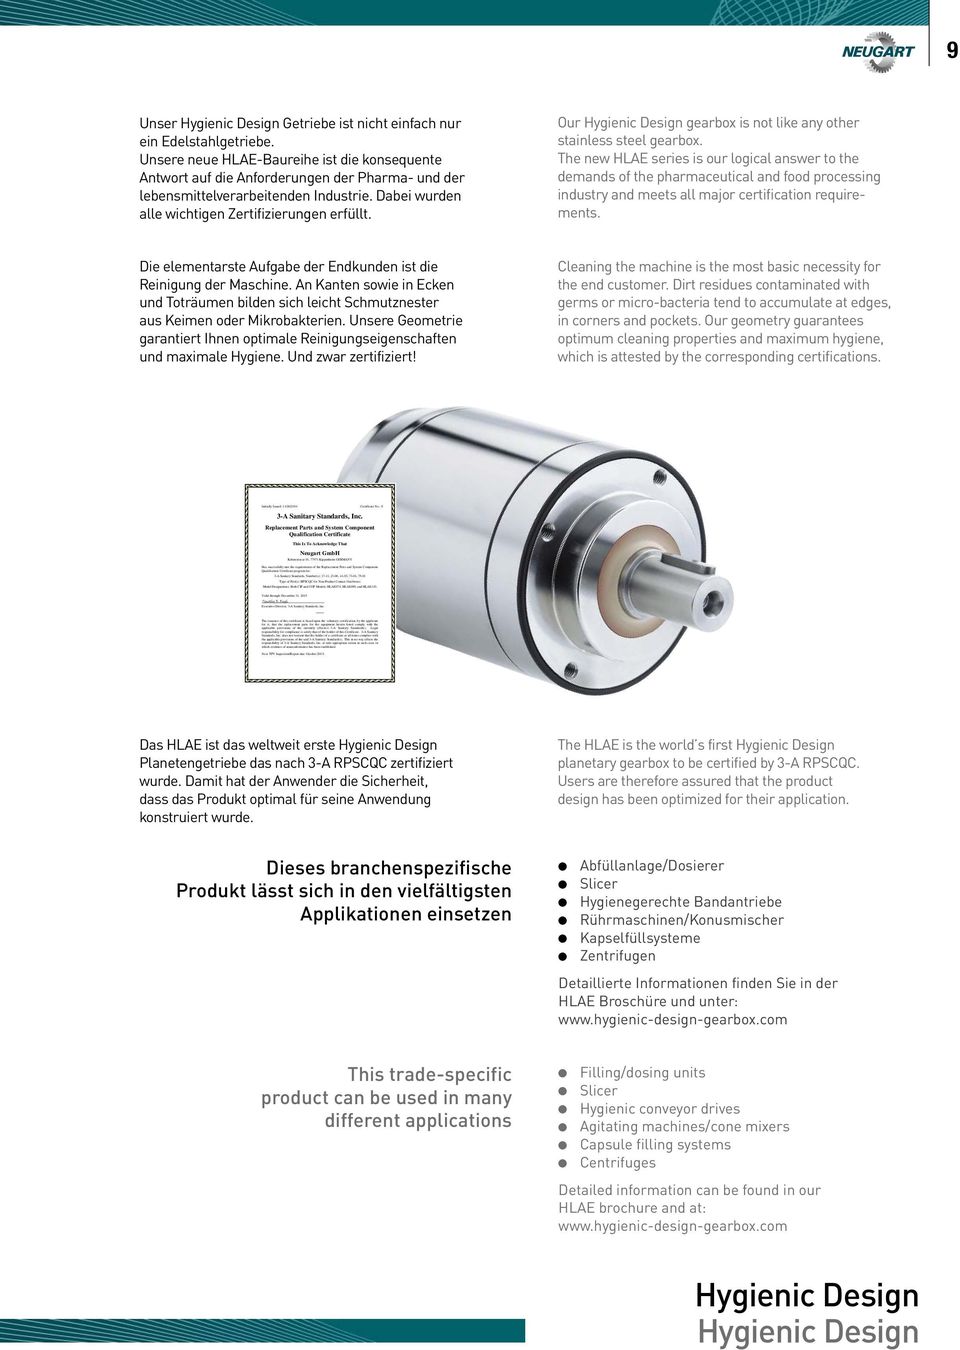 Our Hygienic Design gearbox is not like any other stainless steel gearbox.